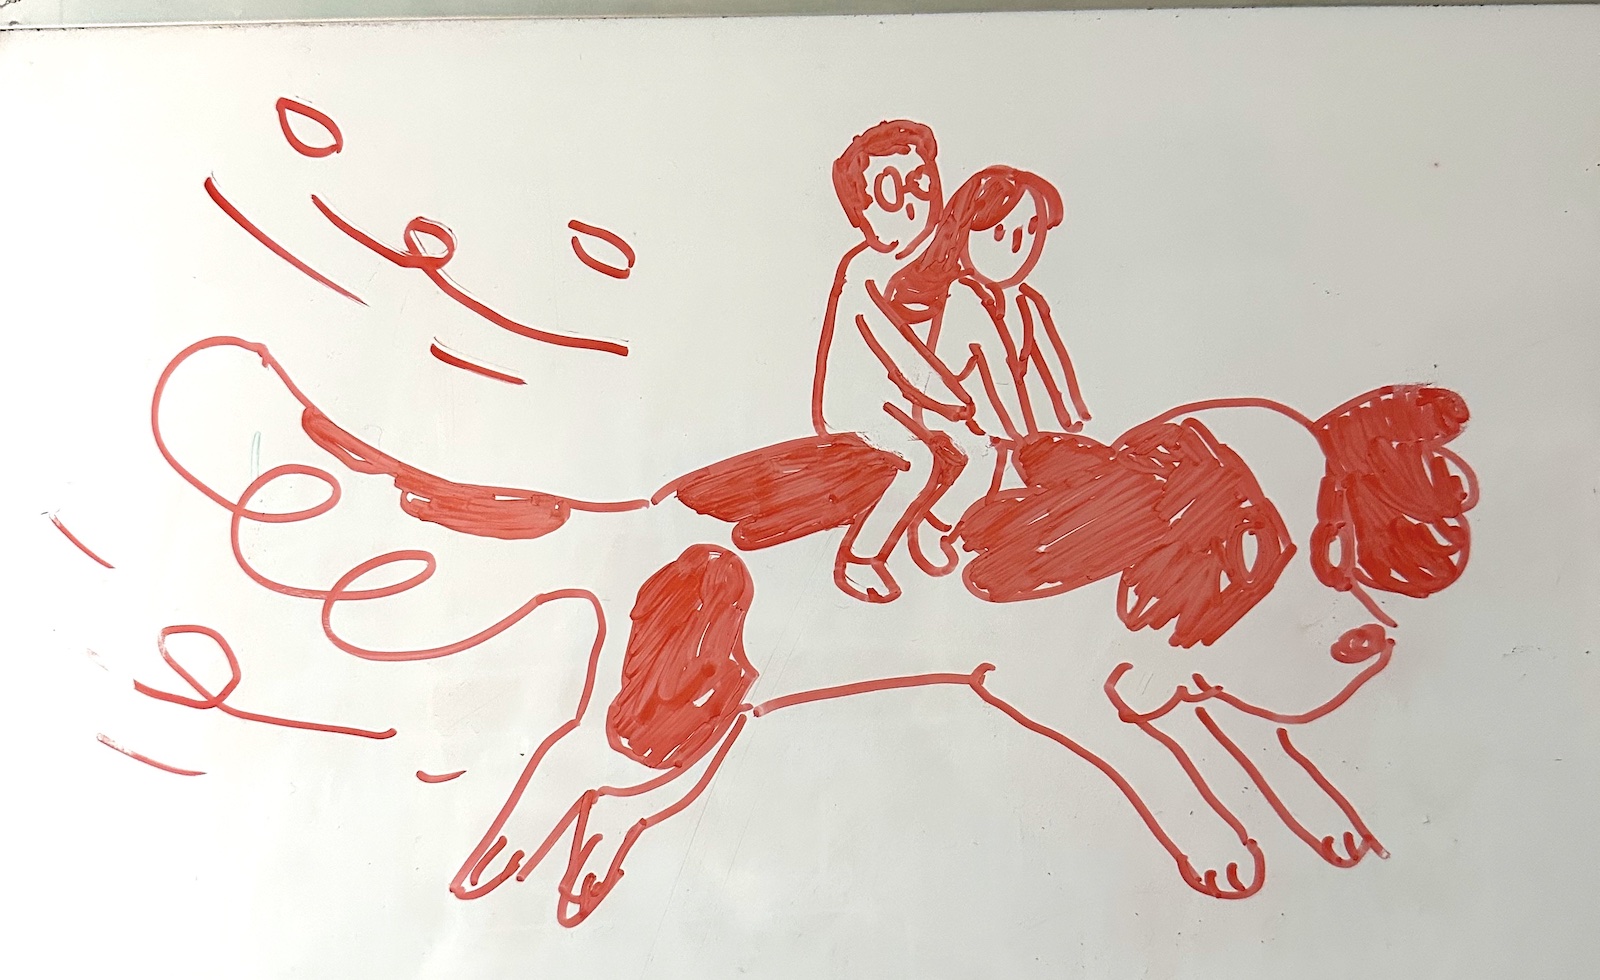 An illustration on a whiteboard that shows my wife and I riding on top of our dog, Rolo. It's not really related to this article, but I liked it so I included it